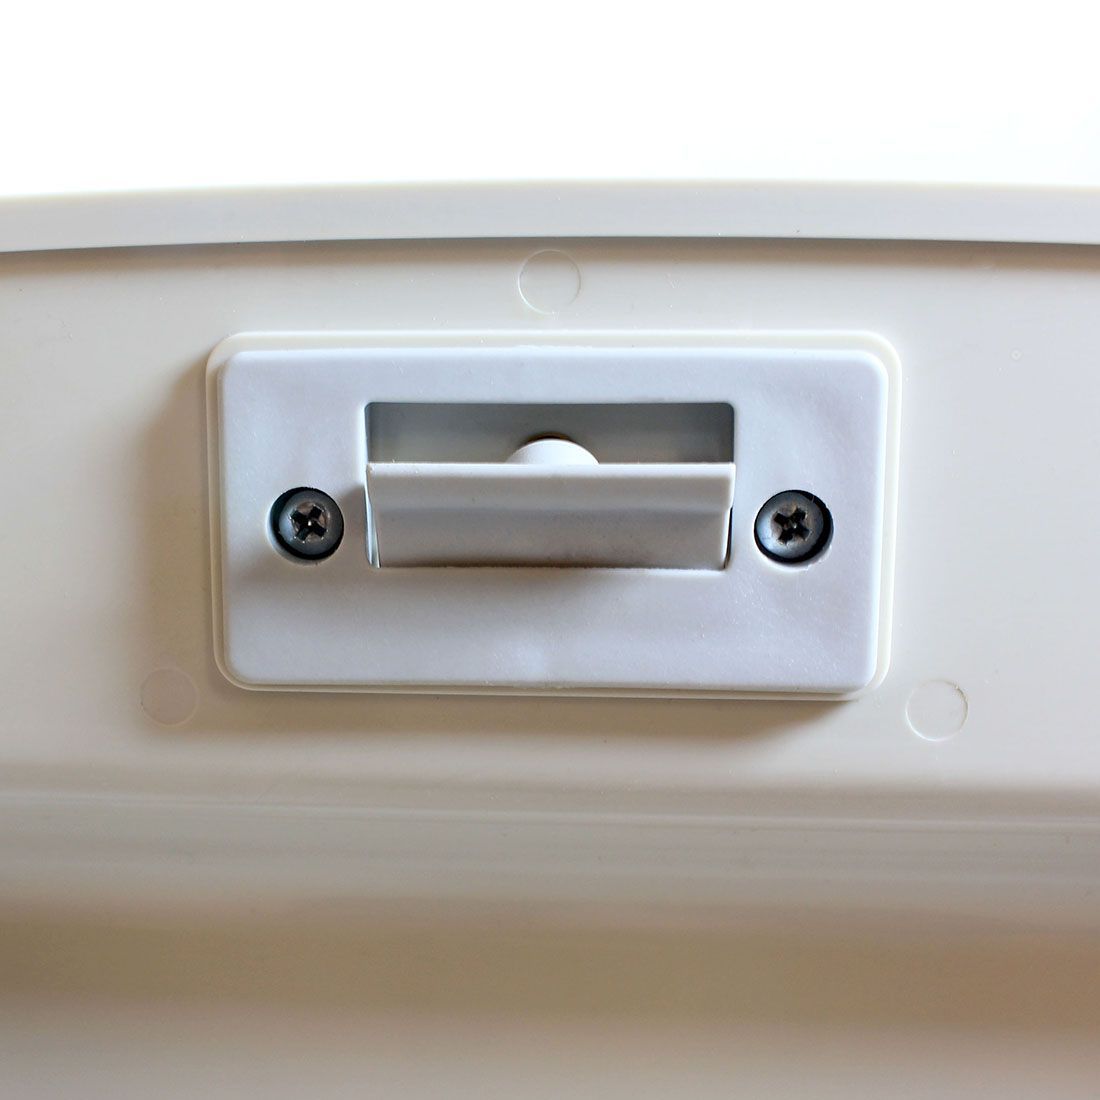 Security Insured Pet Doors Locking Cover Latch Replacement | Secure | Easy to Use Locking Cover